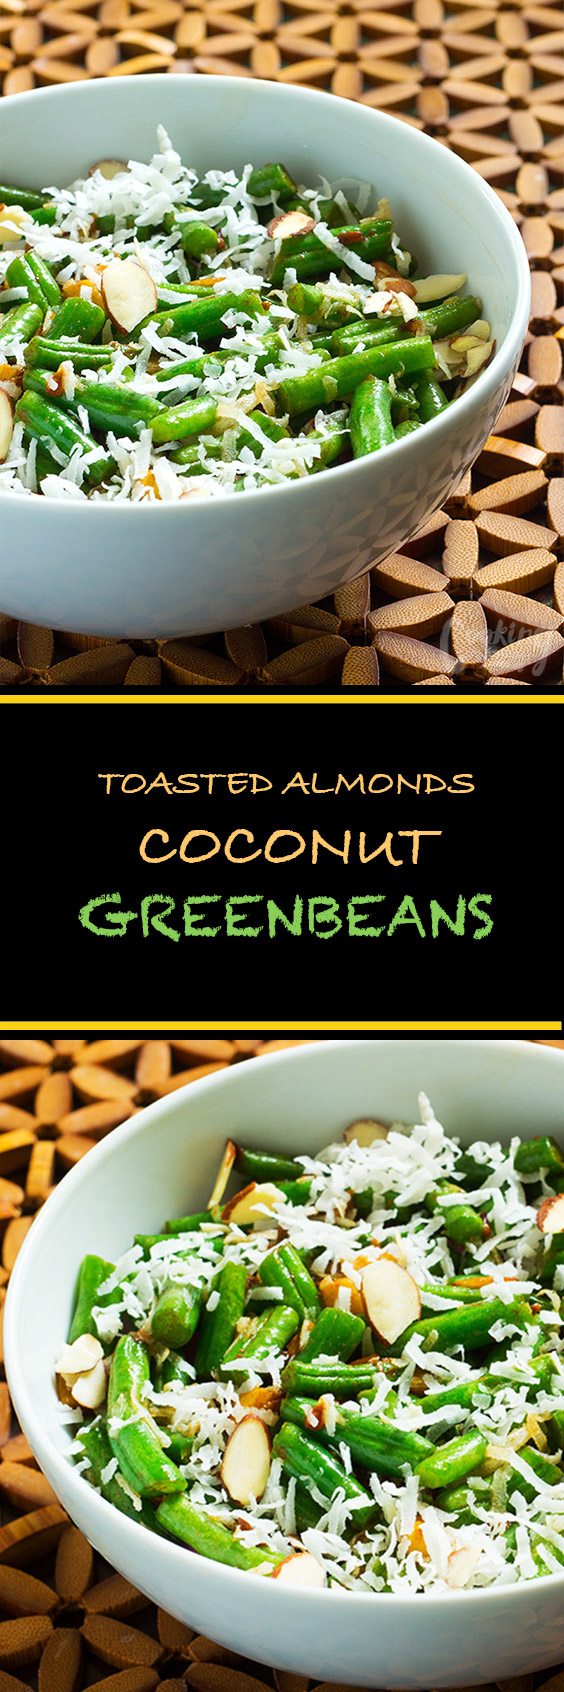 Toasted Almond Coconut Green Beans are deliciously crunchy and when loaded with coconut flakes, almonds and ginger they are out of this world.